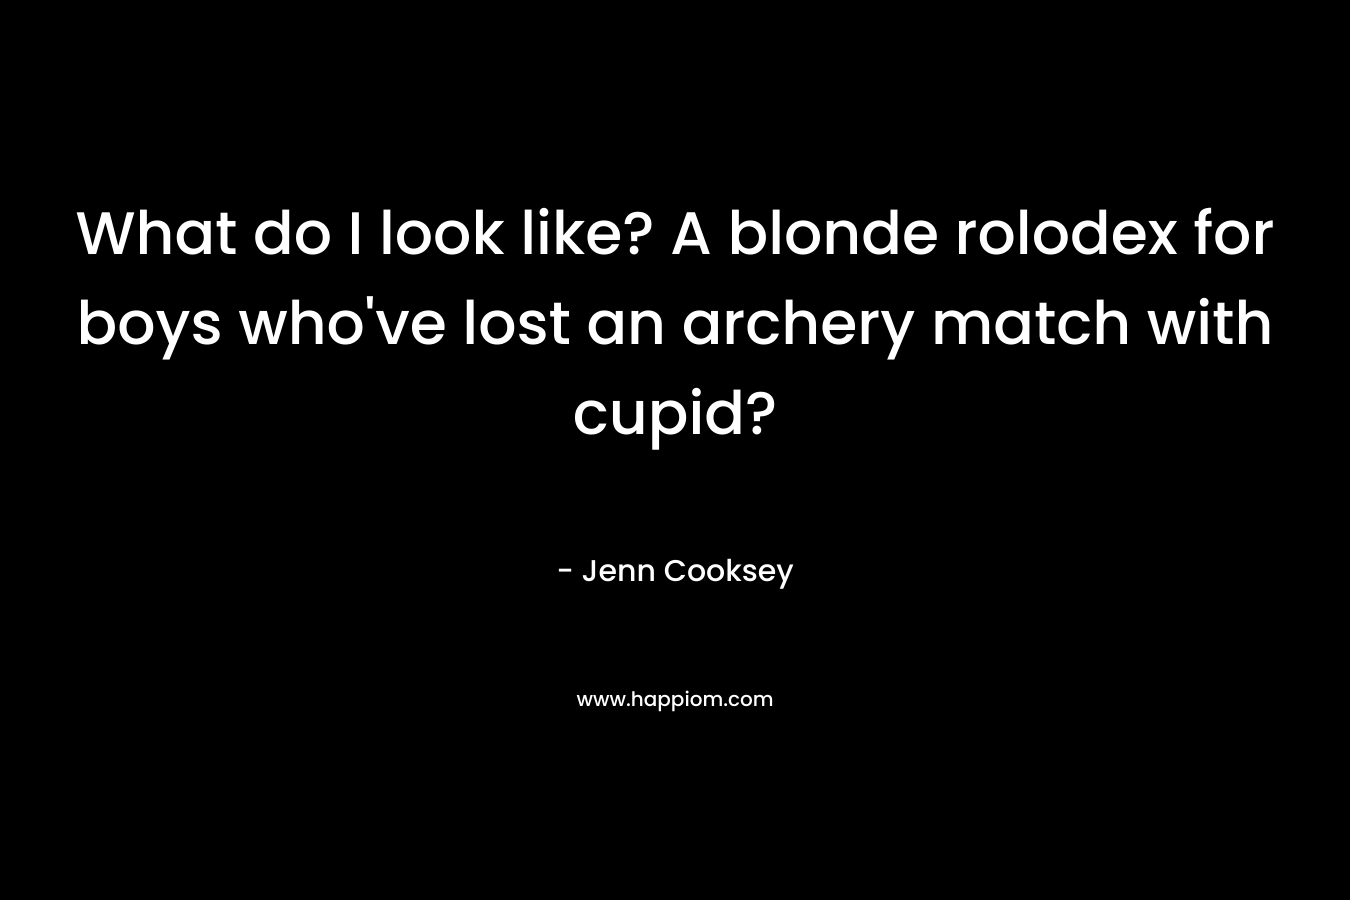 What do I look like? A blonde rolodex for boys who've lost an archery match with cupid?